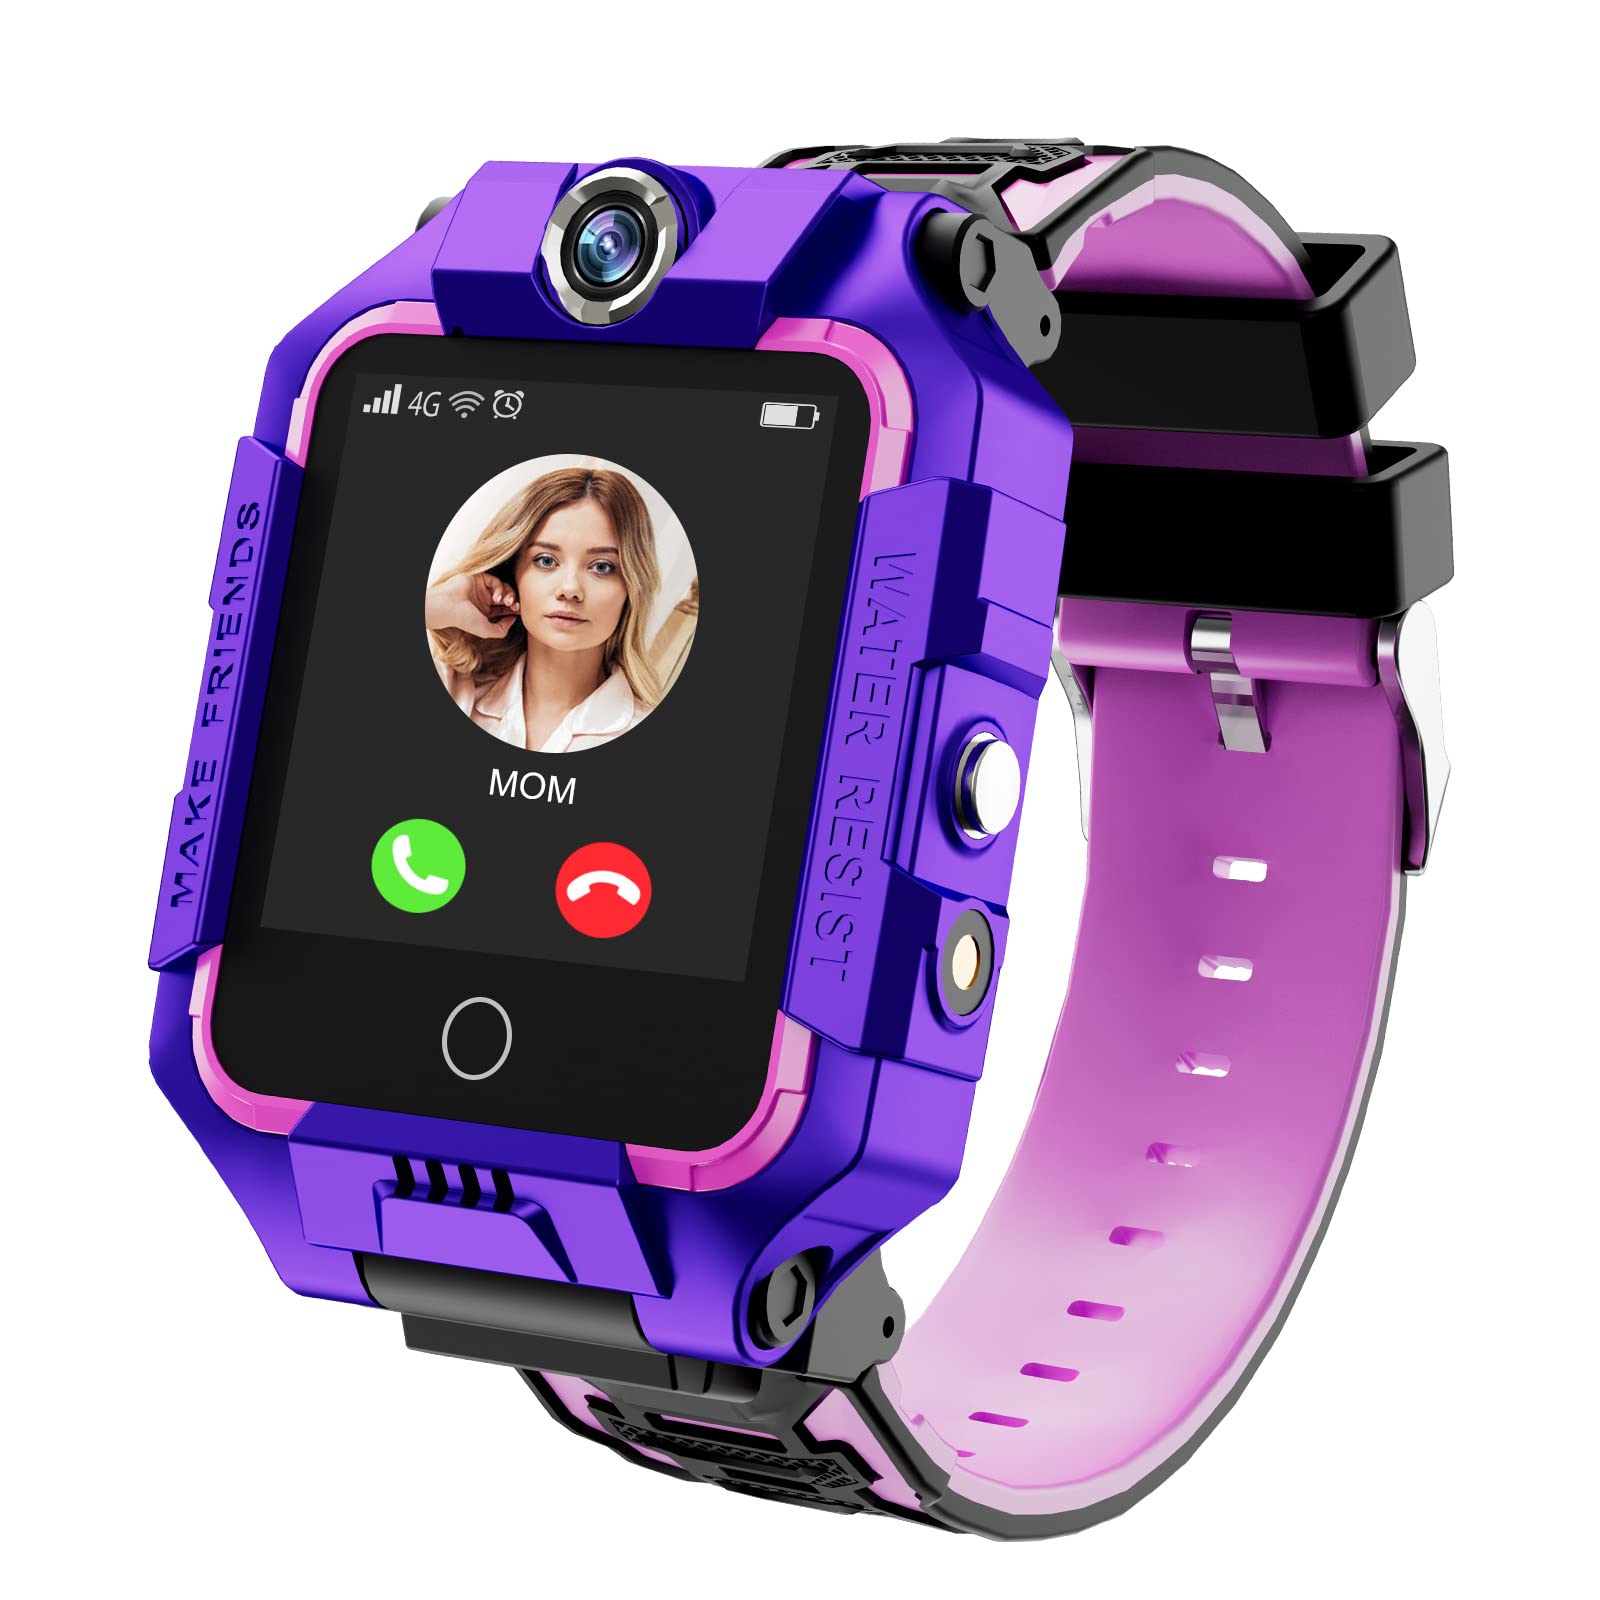 cjc 4G Smartwatch for Kids, Phone Watch with Camera,Answer Call,Pedometer,SOS,GPS,Touch Screen WiFi Wrist Watch Boys Girls Smartphone 3-12 Years Ol...